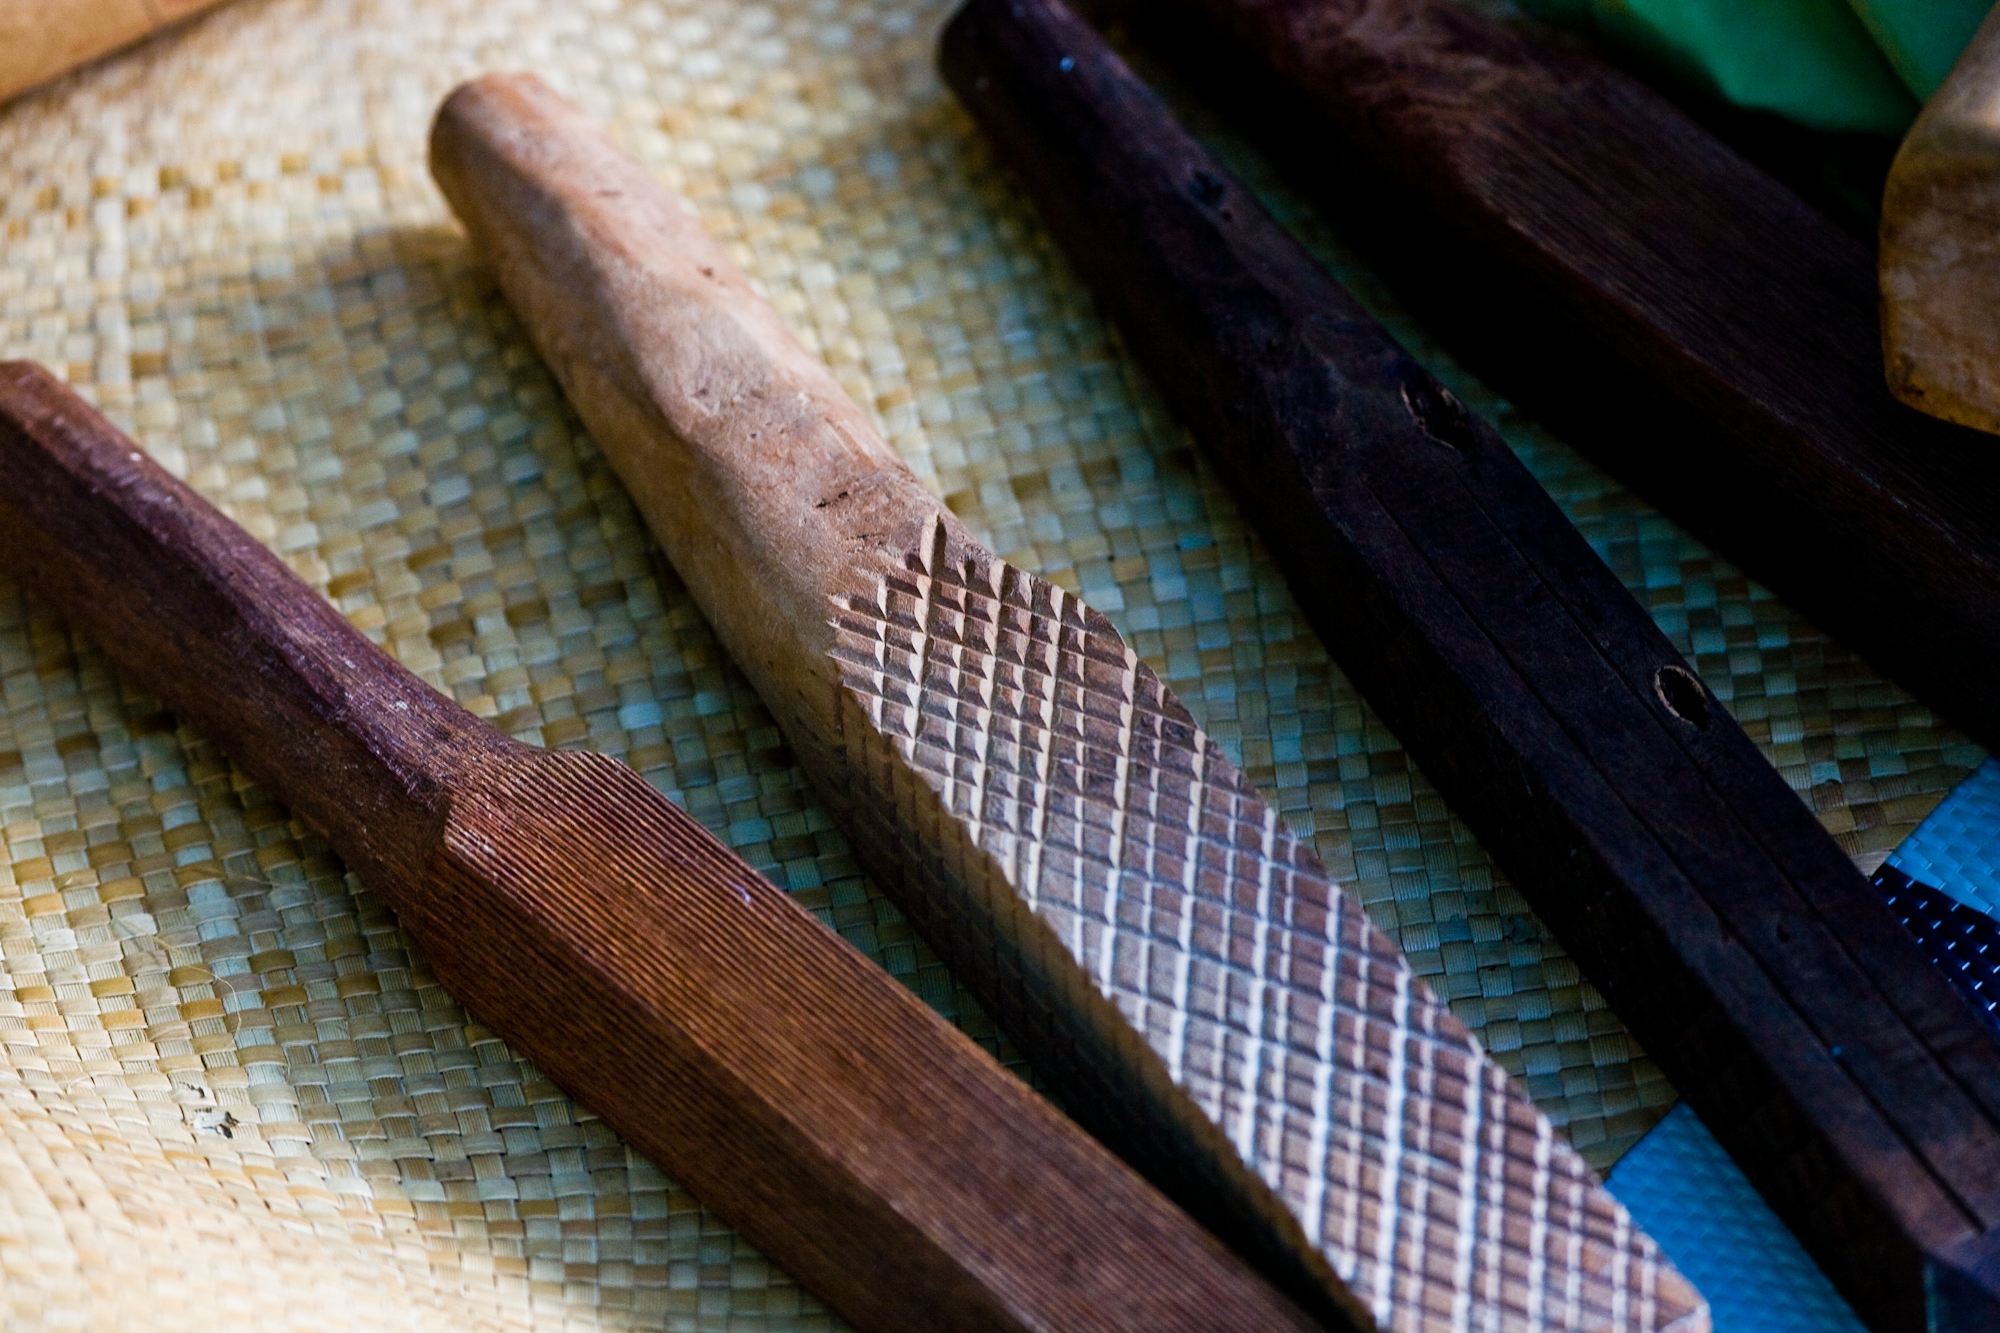 Tools used for making kapa (cloth) made from bark for various uses including clothing and bedding. PC: Tor Johnson/Hawaiʻi Tourism Authority